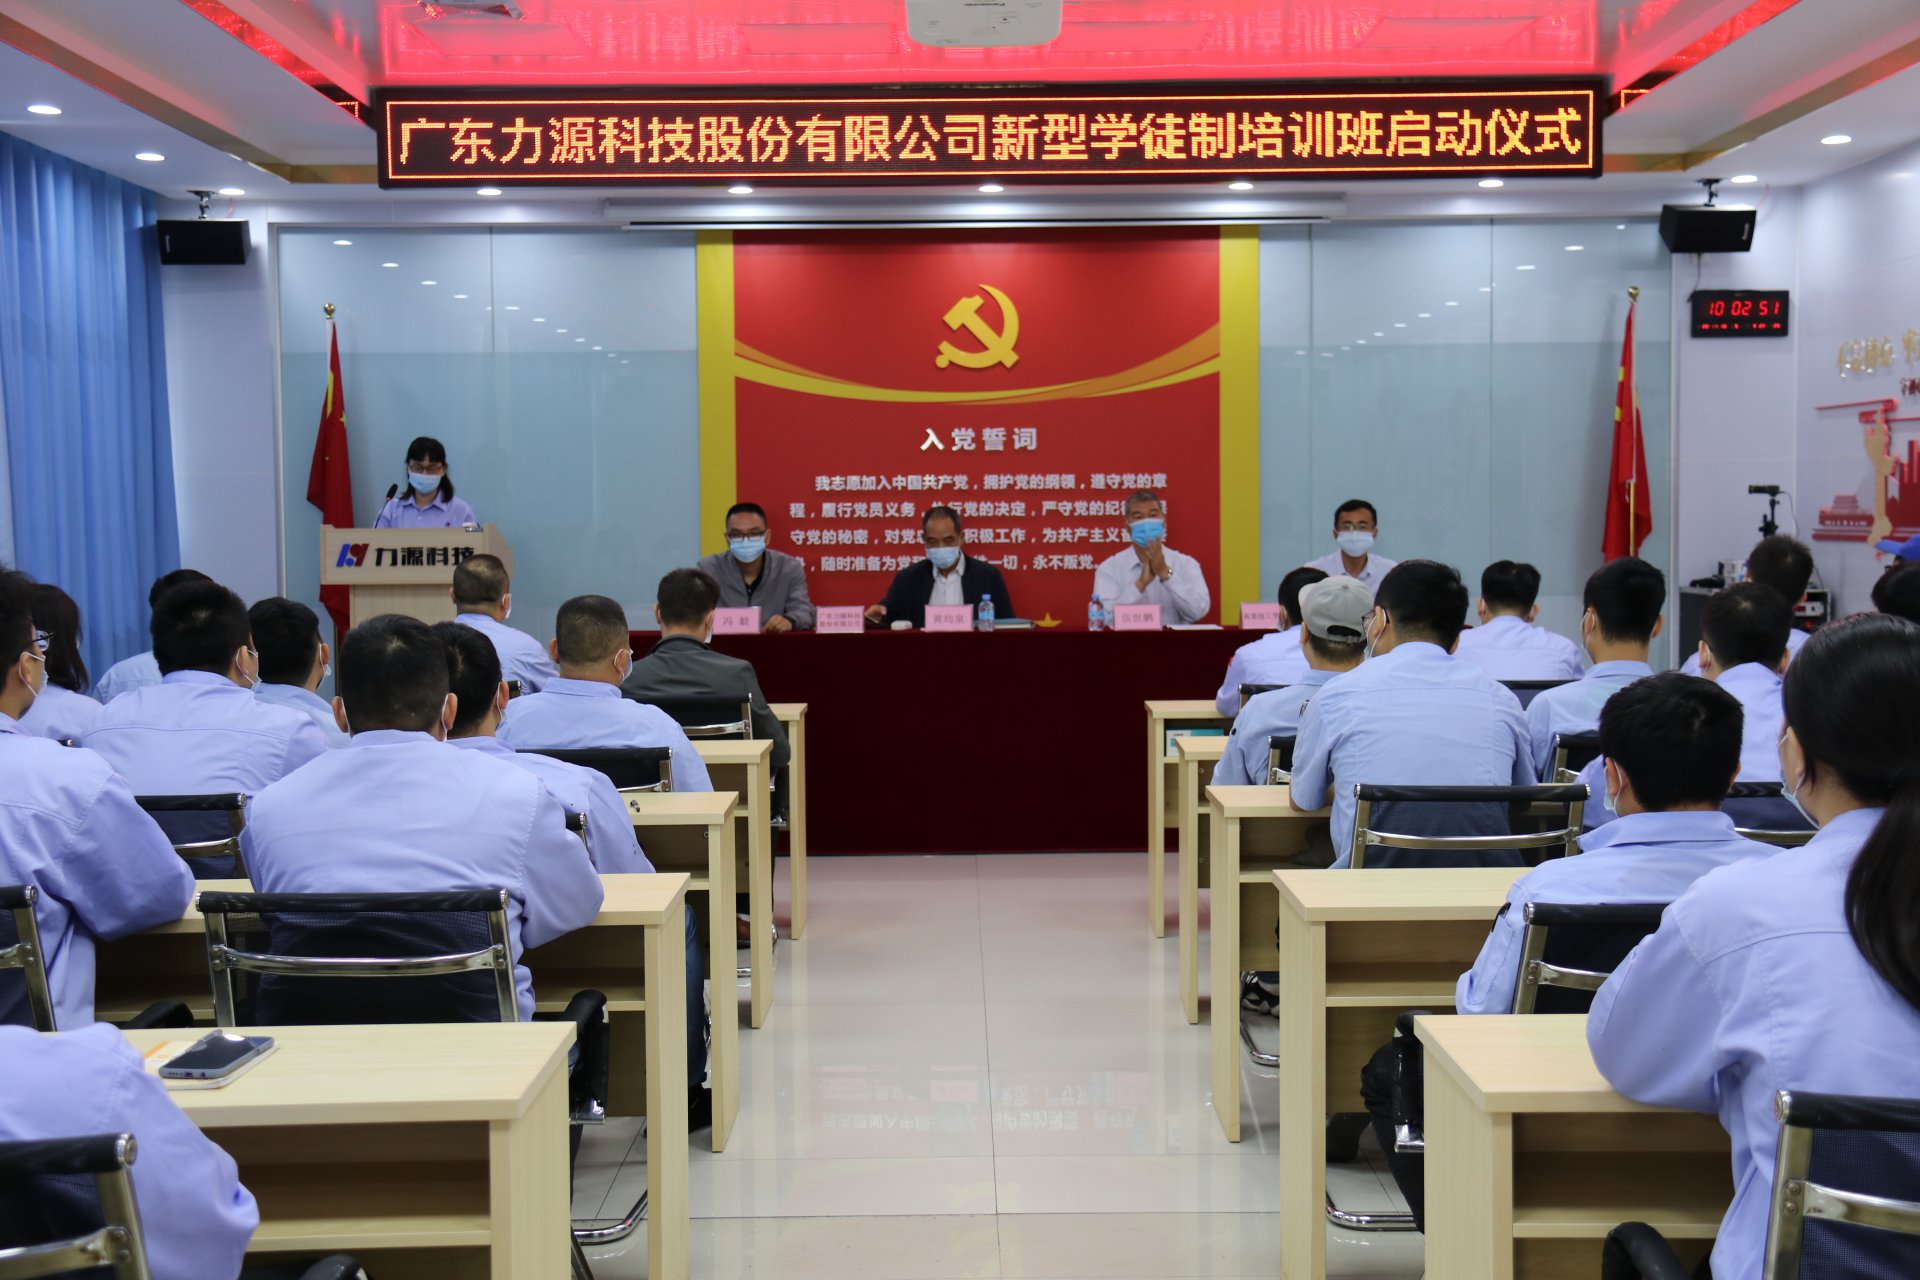 The launching ceremony of liyuan's 2019&2020 apprenticeship training was held successfully